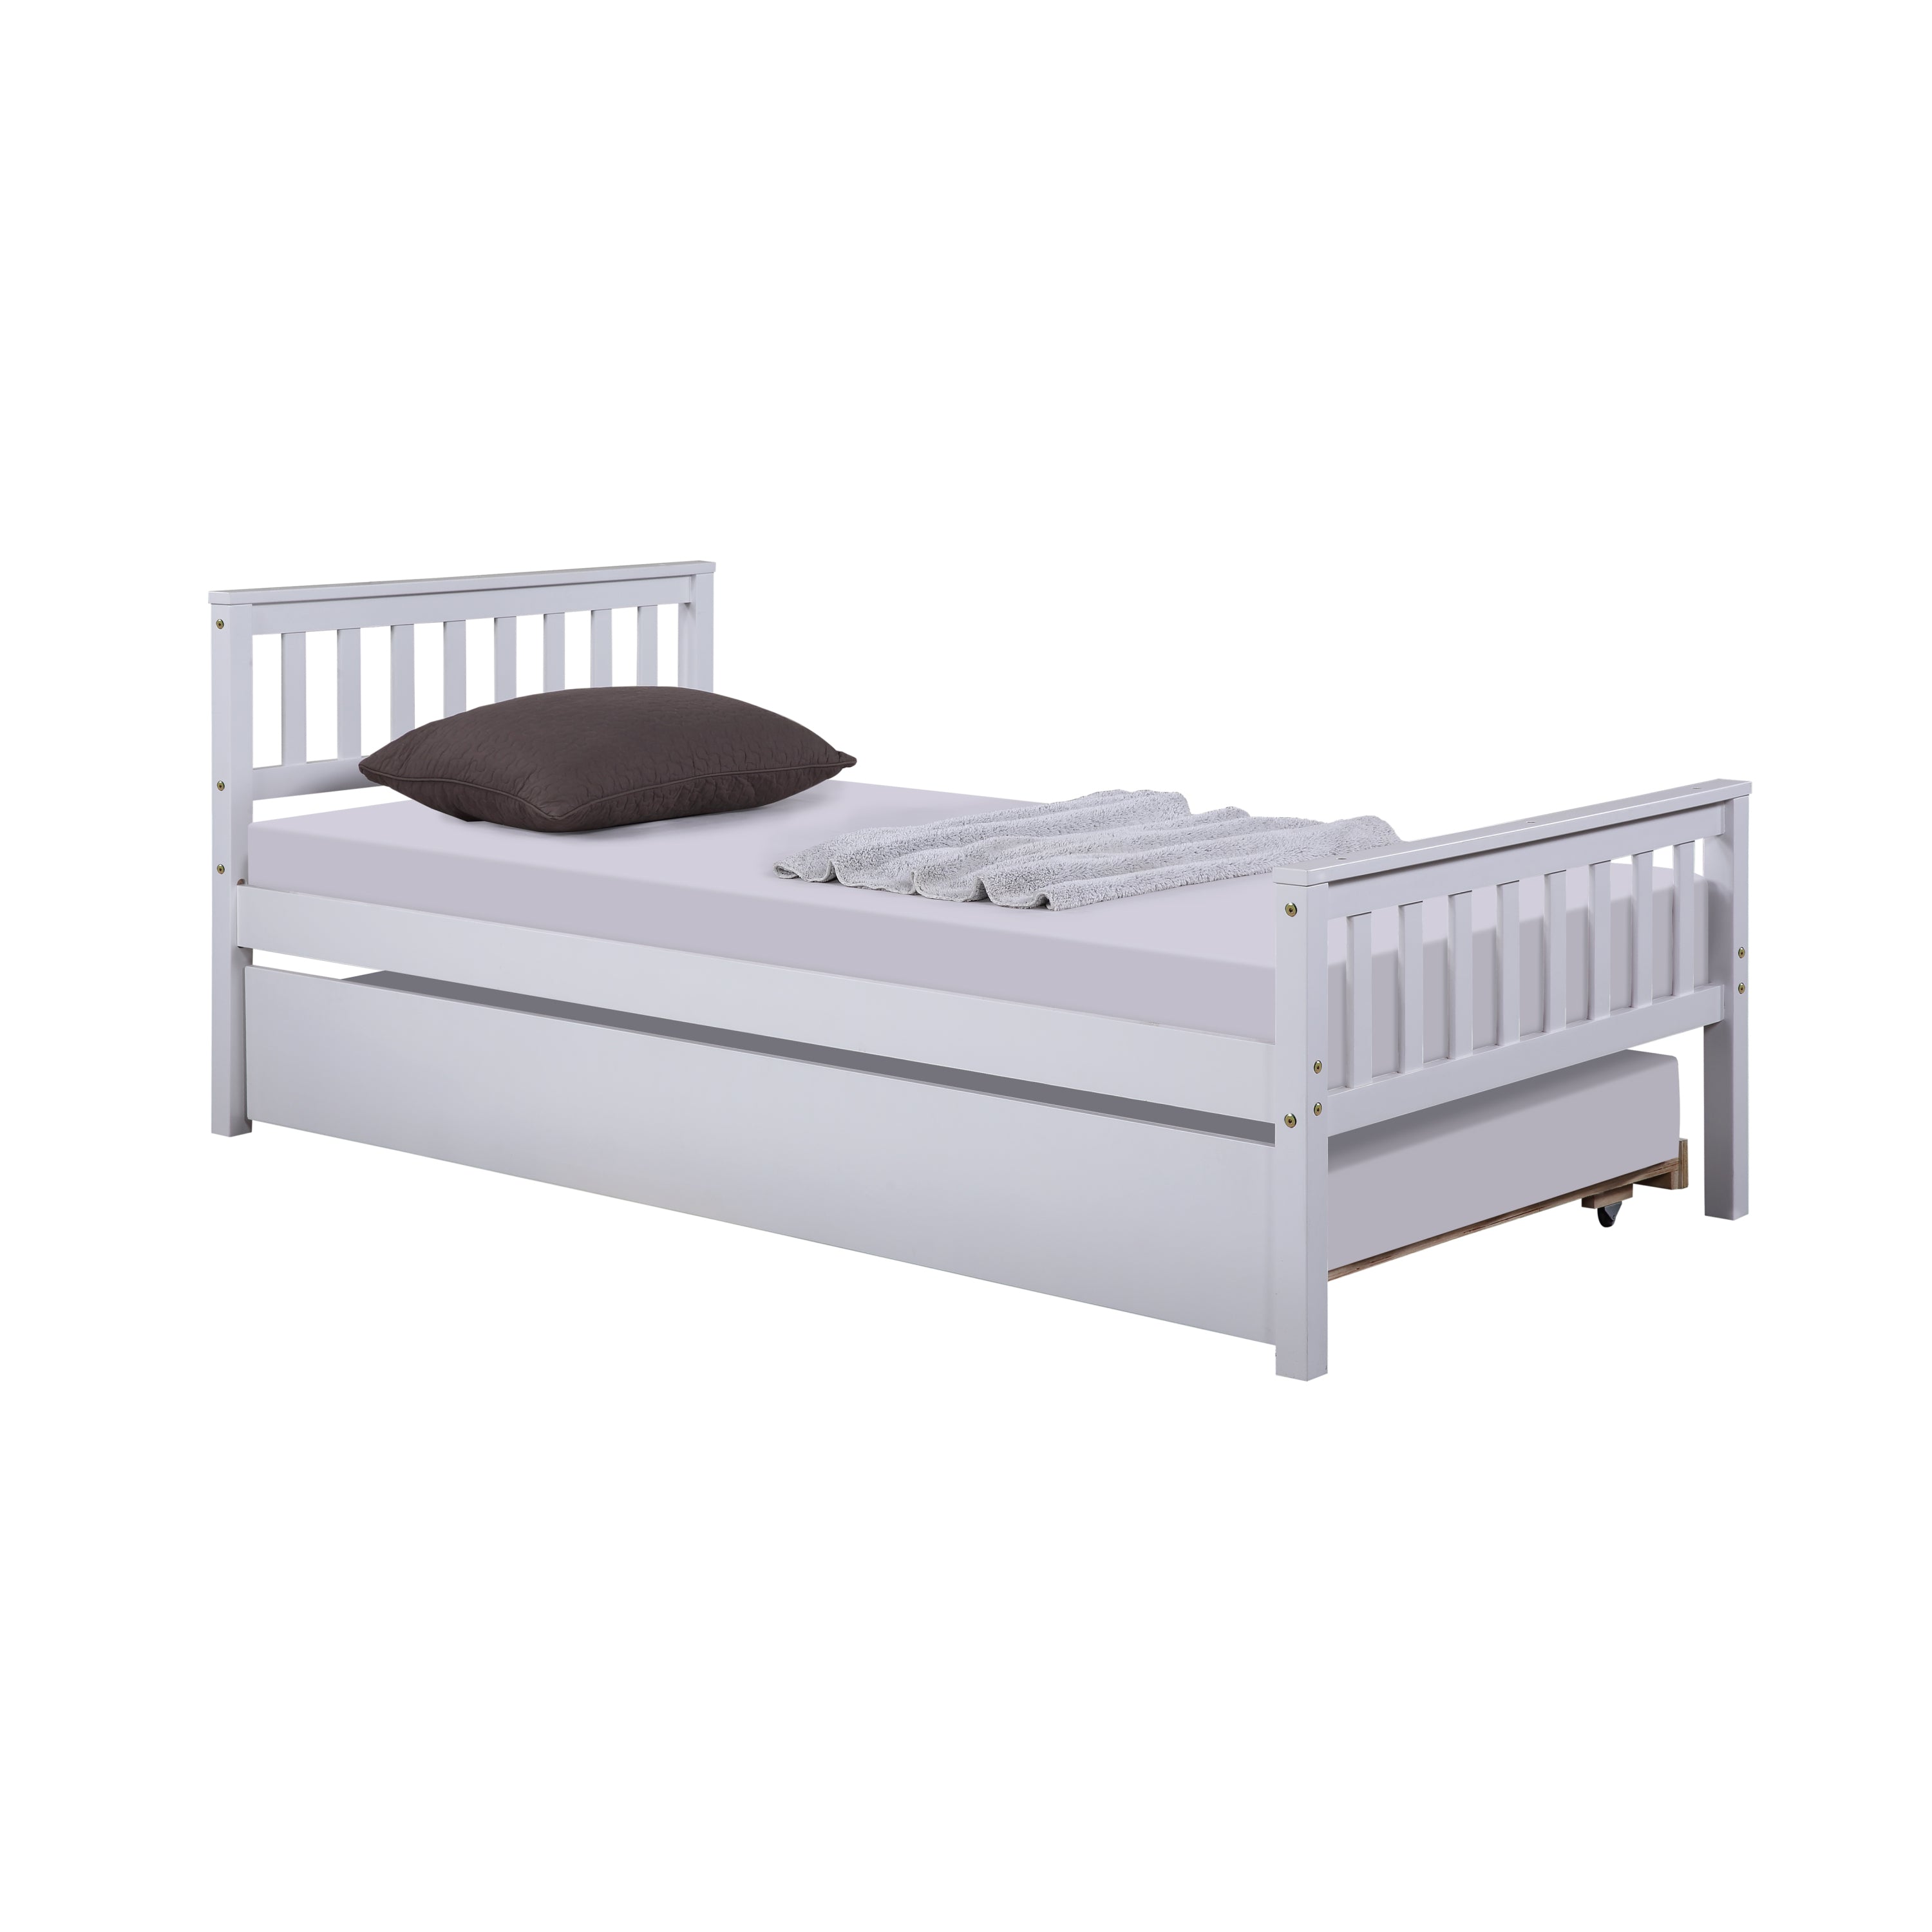 Gray Twin Bed Frame with Trundle and Headboard By: Alabama Beds